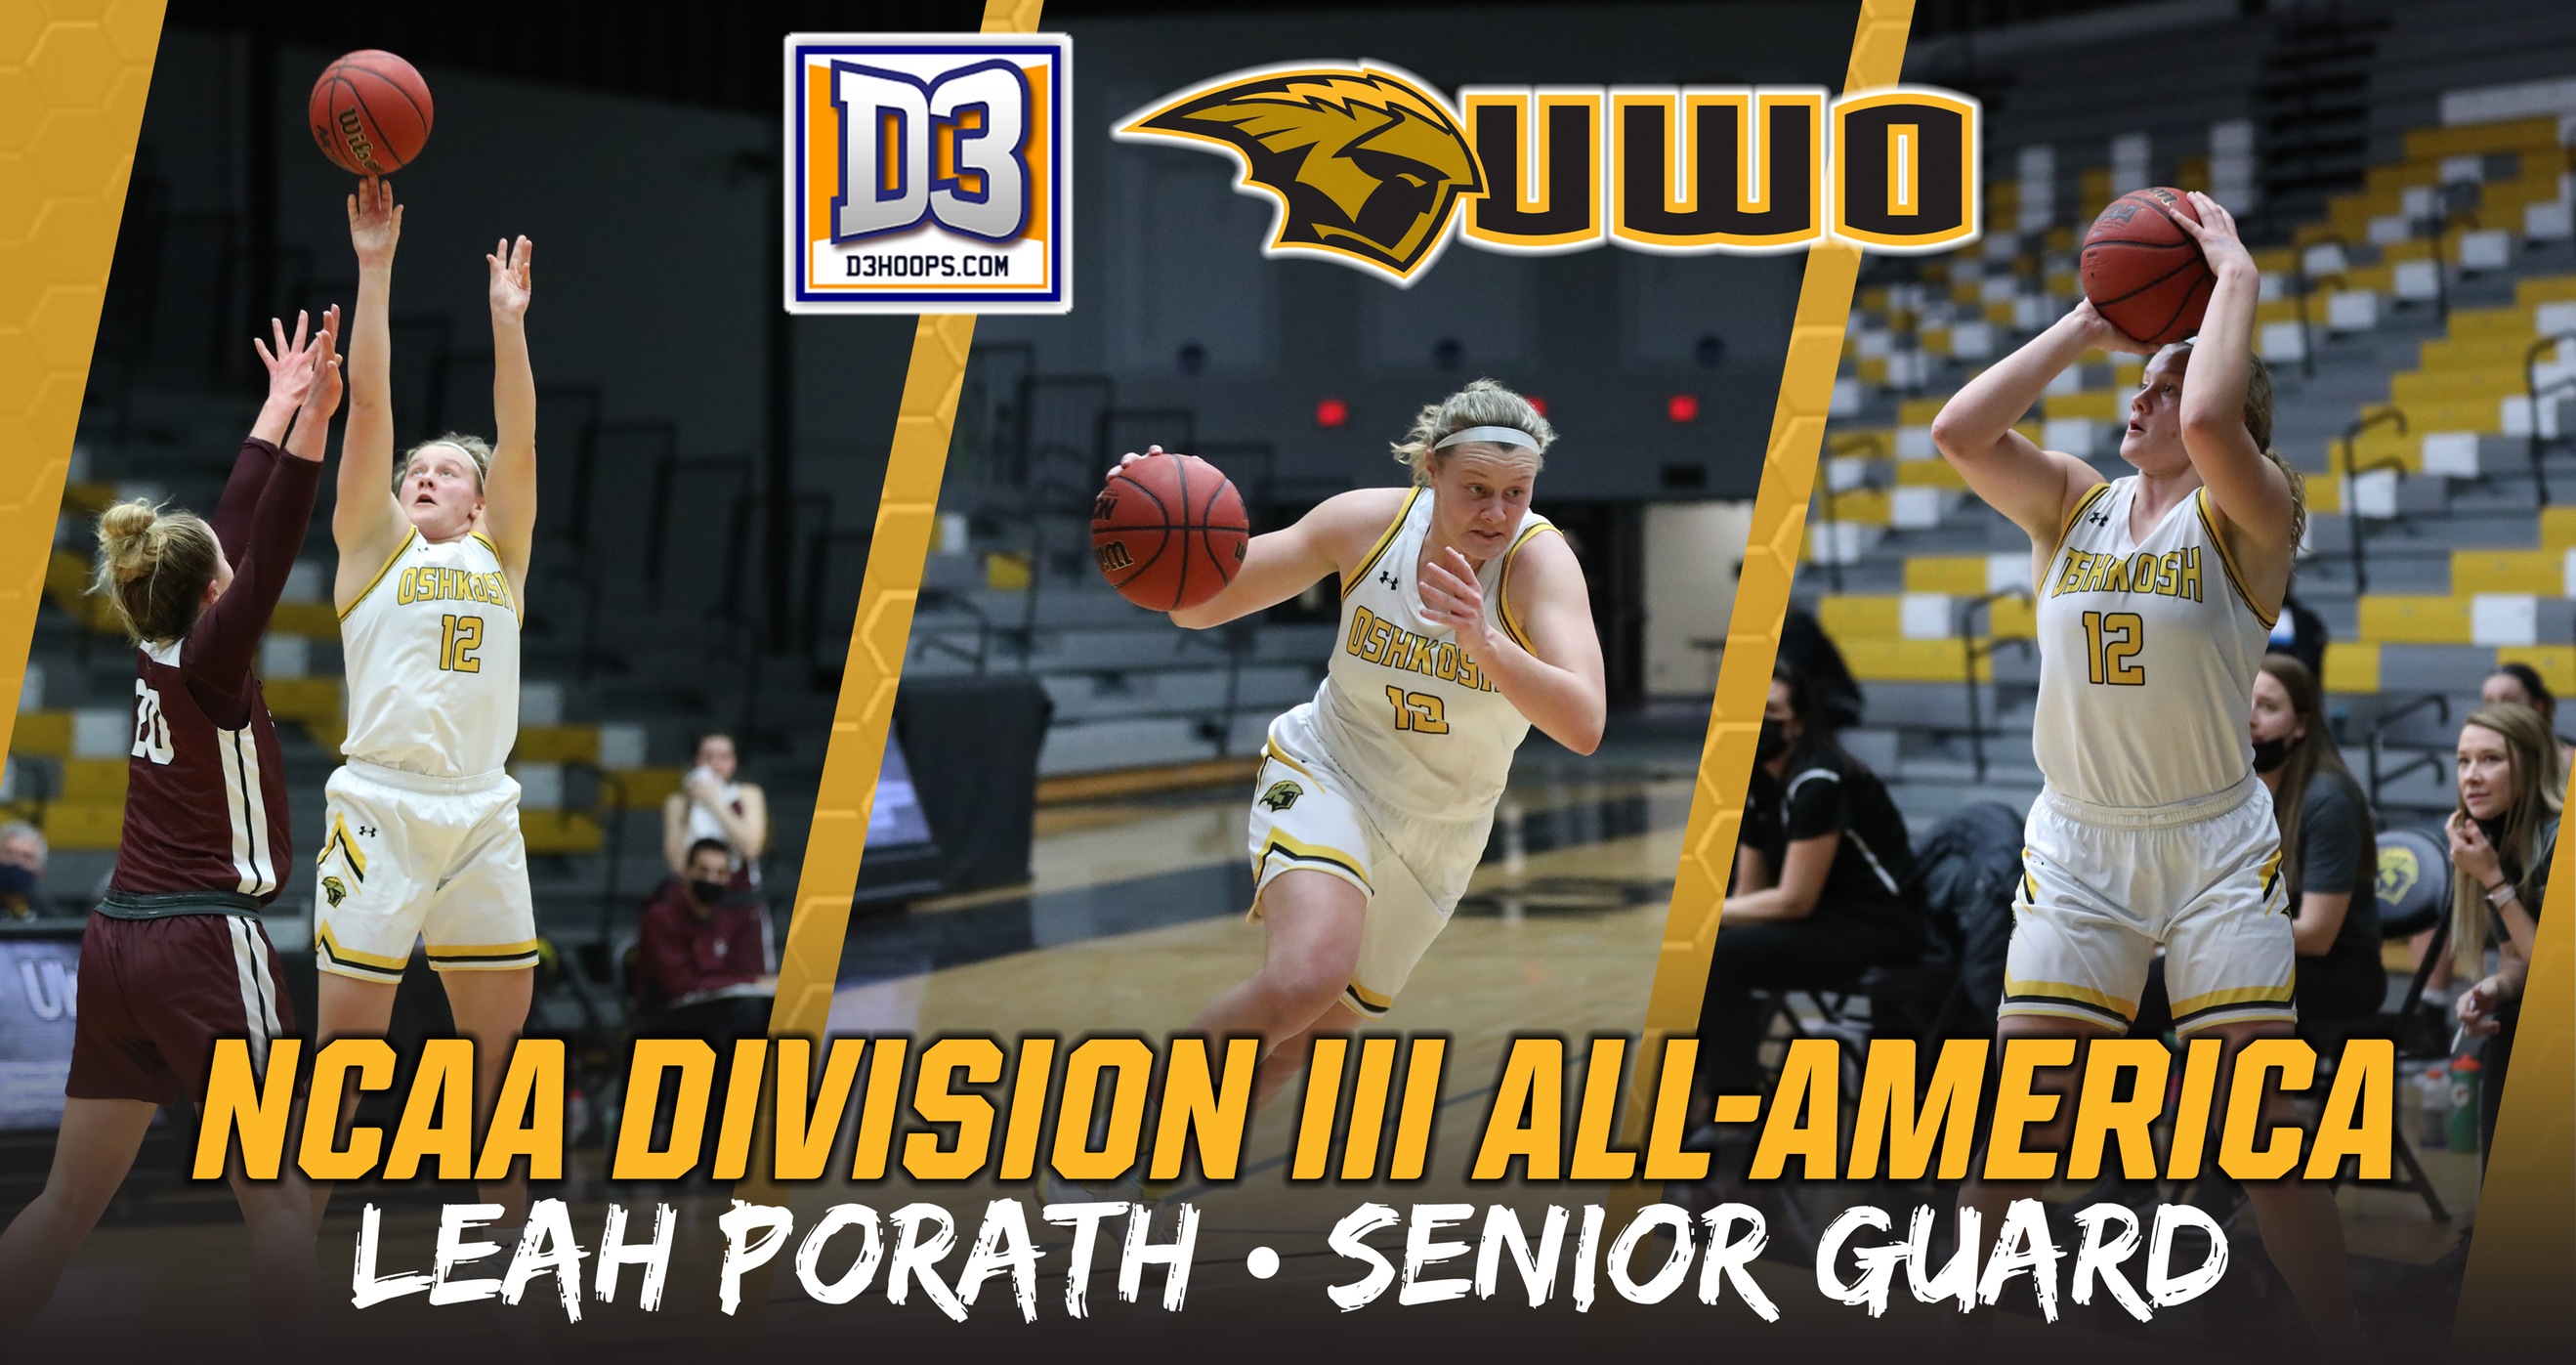 Porath Receives All-America First Team Honor From D3hoops.com